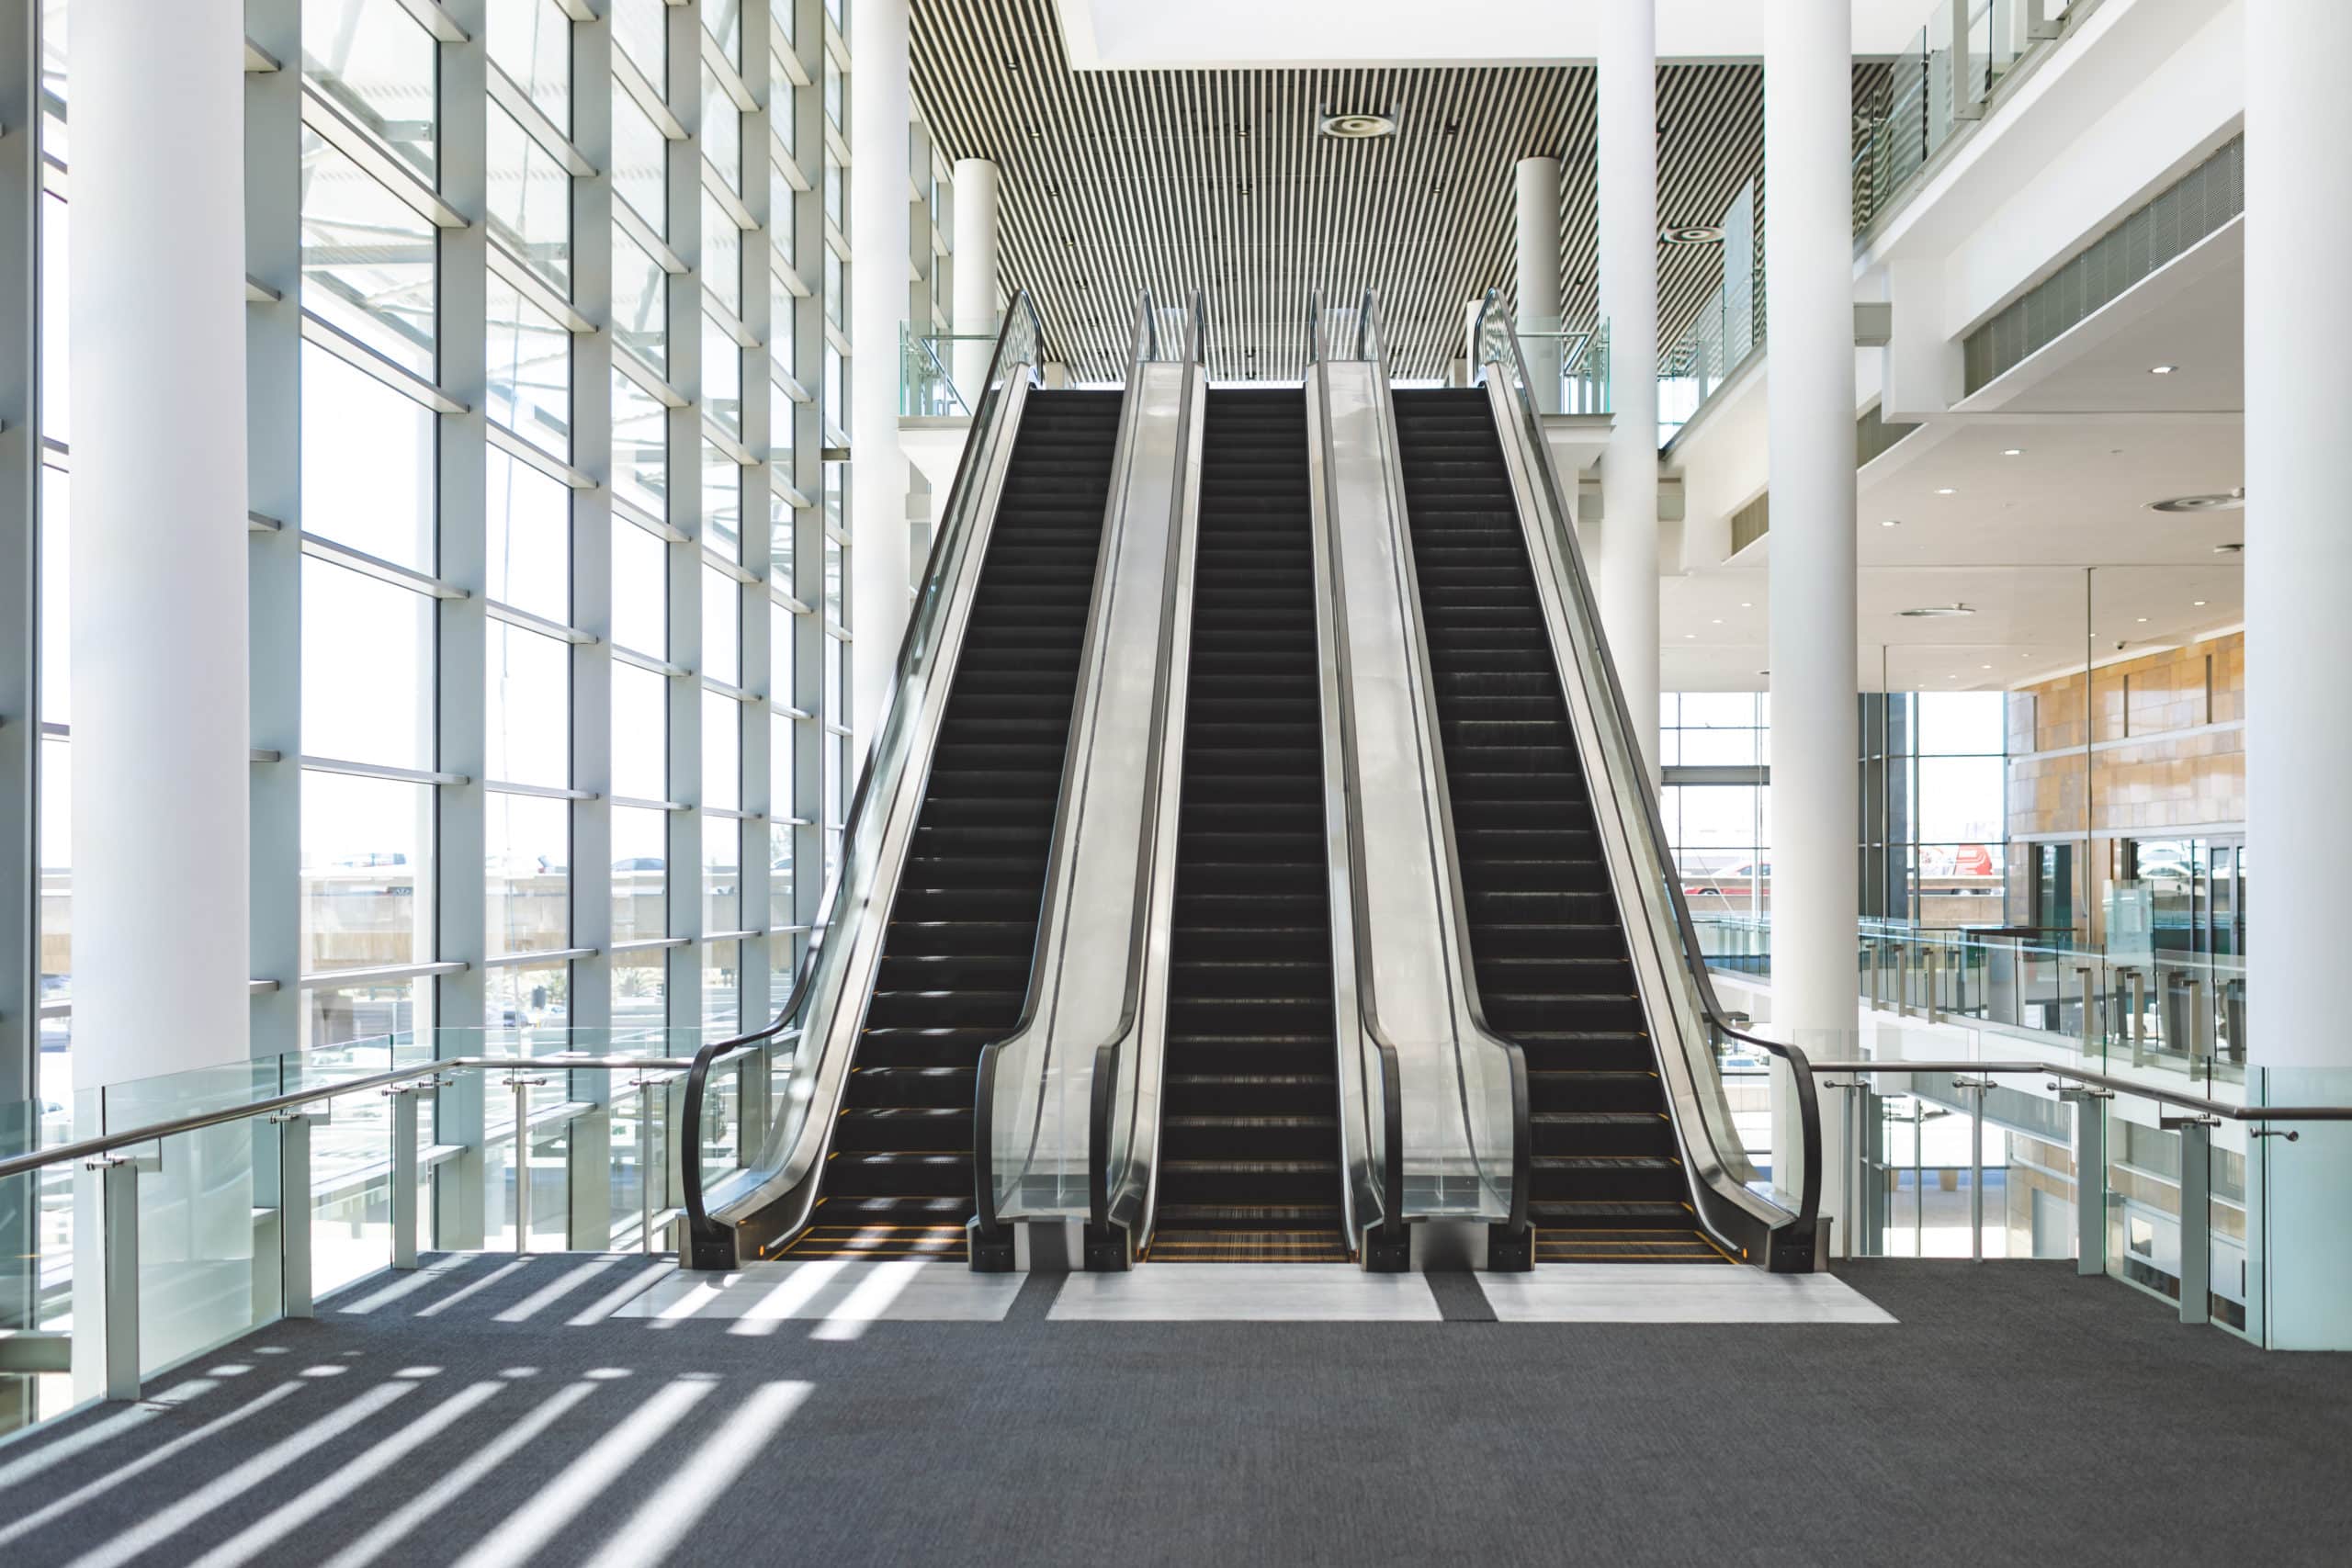 Front view of escalators in an empty modern office building